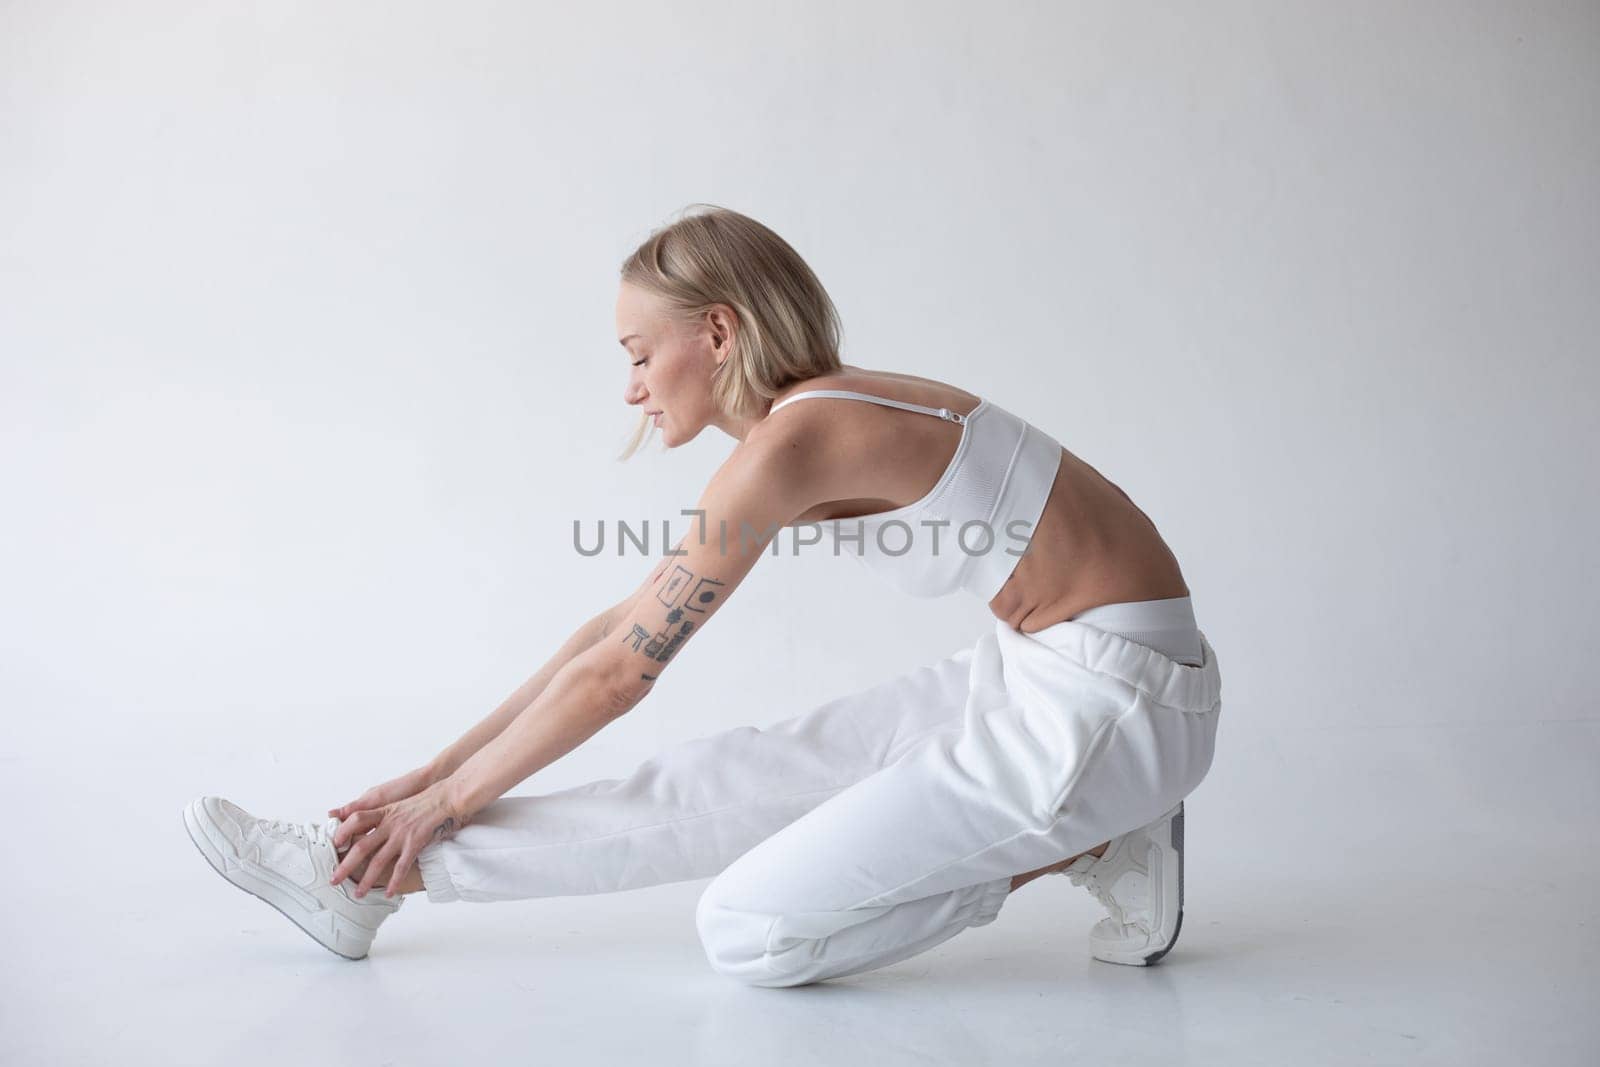 Beautiful blonde girl in a white top and tights posing on a white background. Sits on the floor. by Freeman_Studio